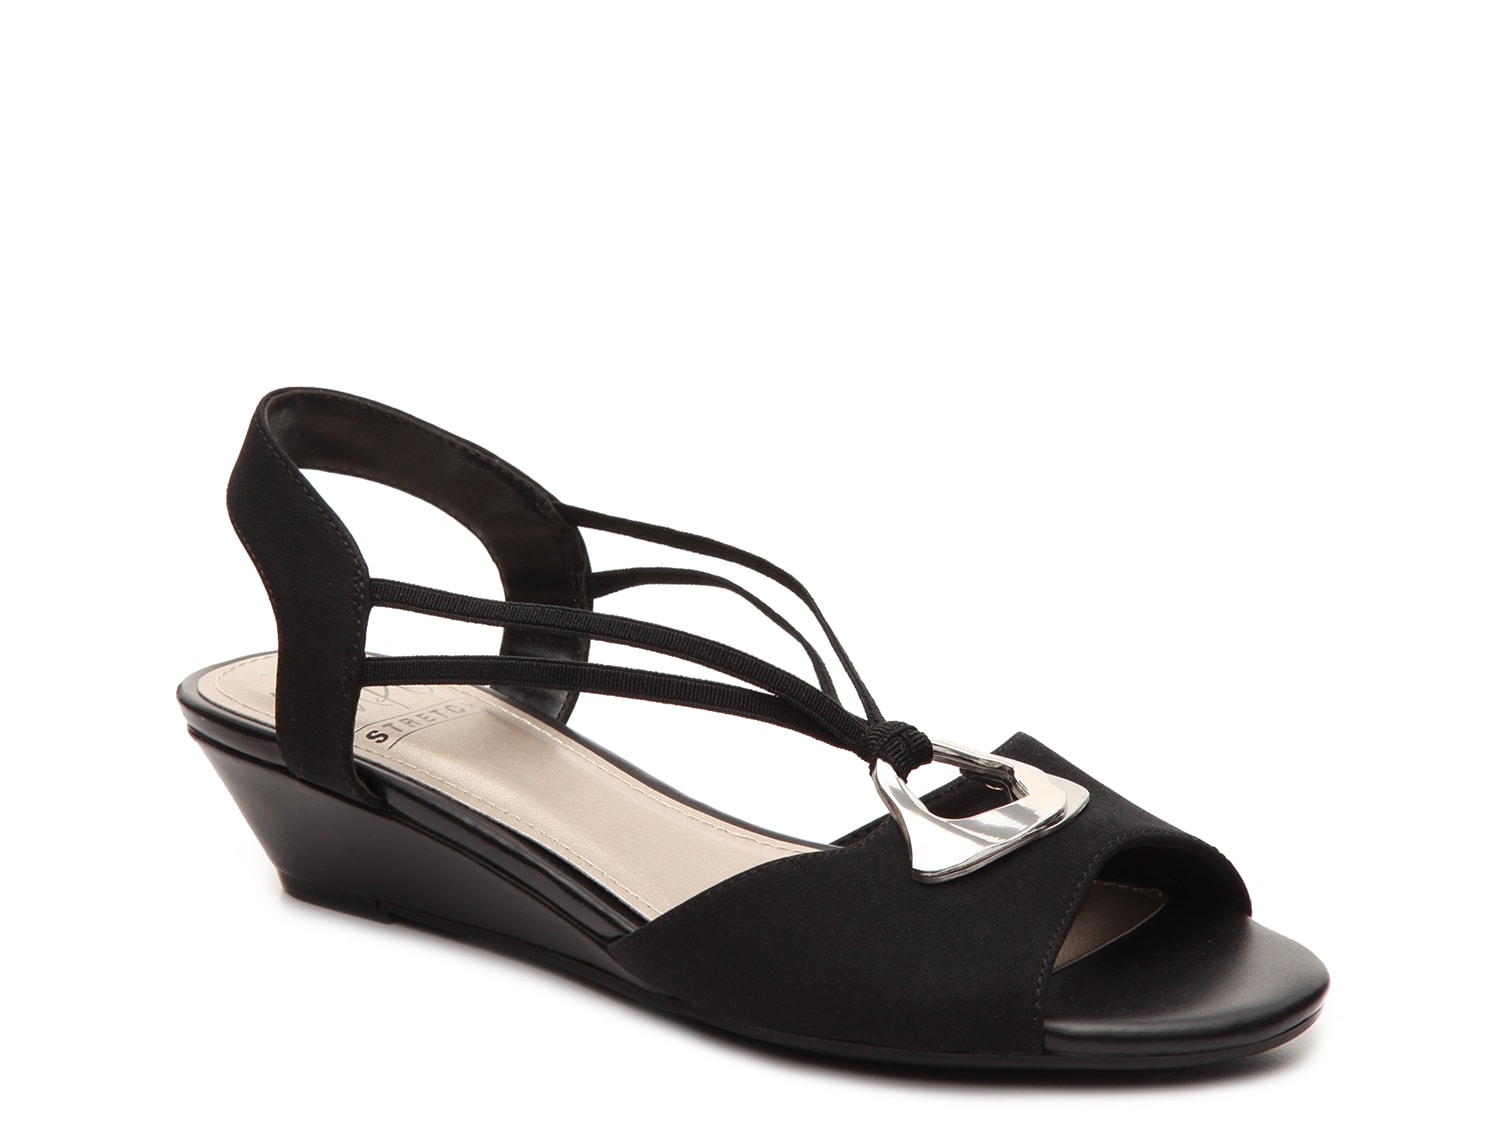 Impo Rainer Wedge Sandal - Free Shipping | DSW